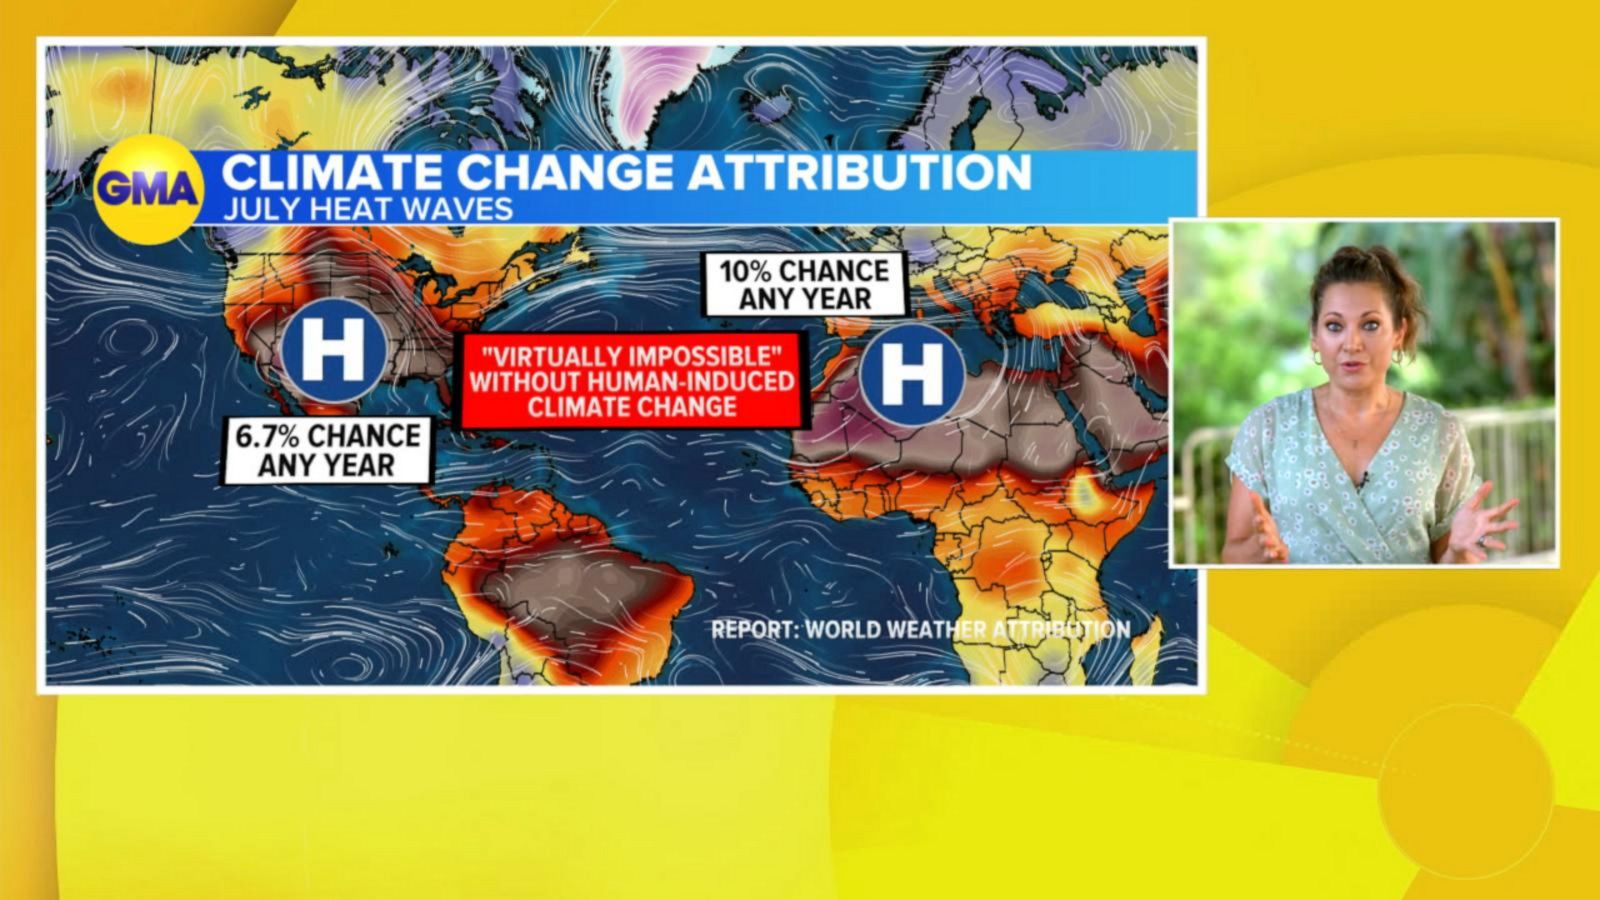 VIDEO: Global July heat waves virtually impossible without climate change: Study